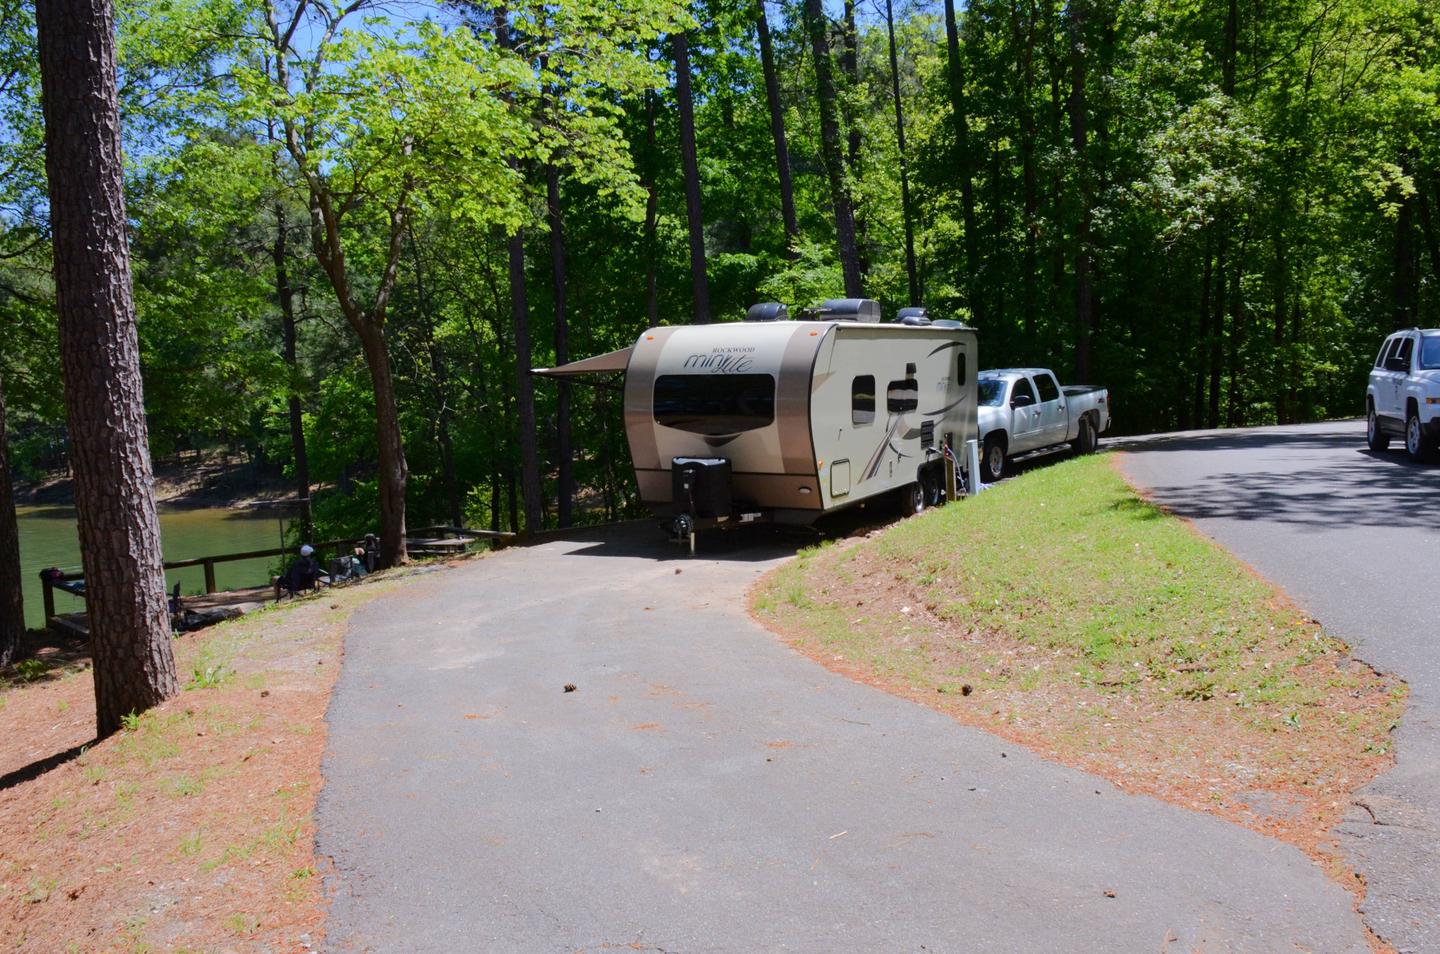 Pull-thru exit, driveway slope, utilities-side clearance, awning-side clearance.McKinney Campground, campsite 86.